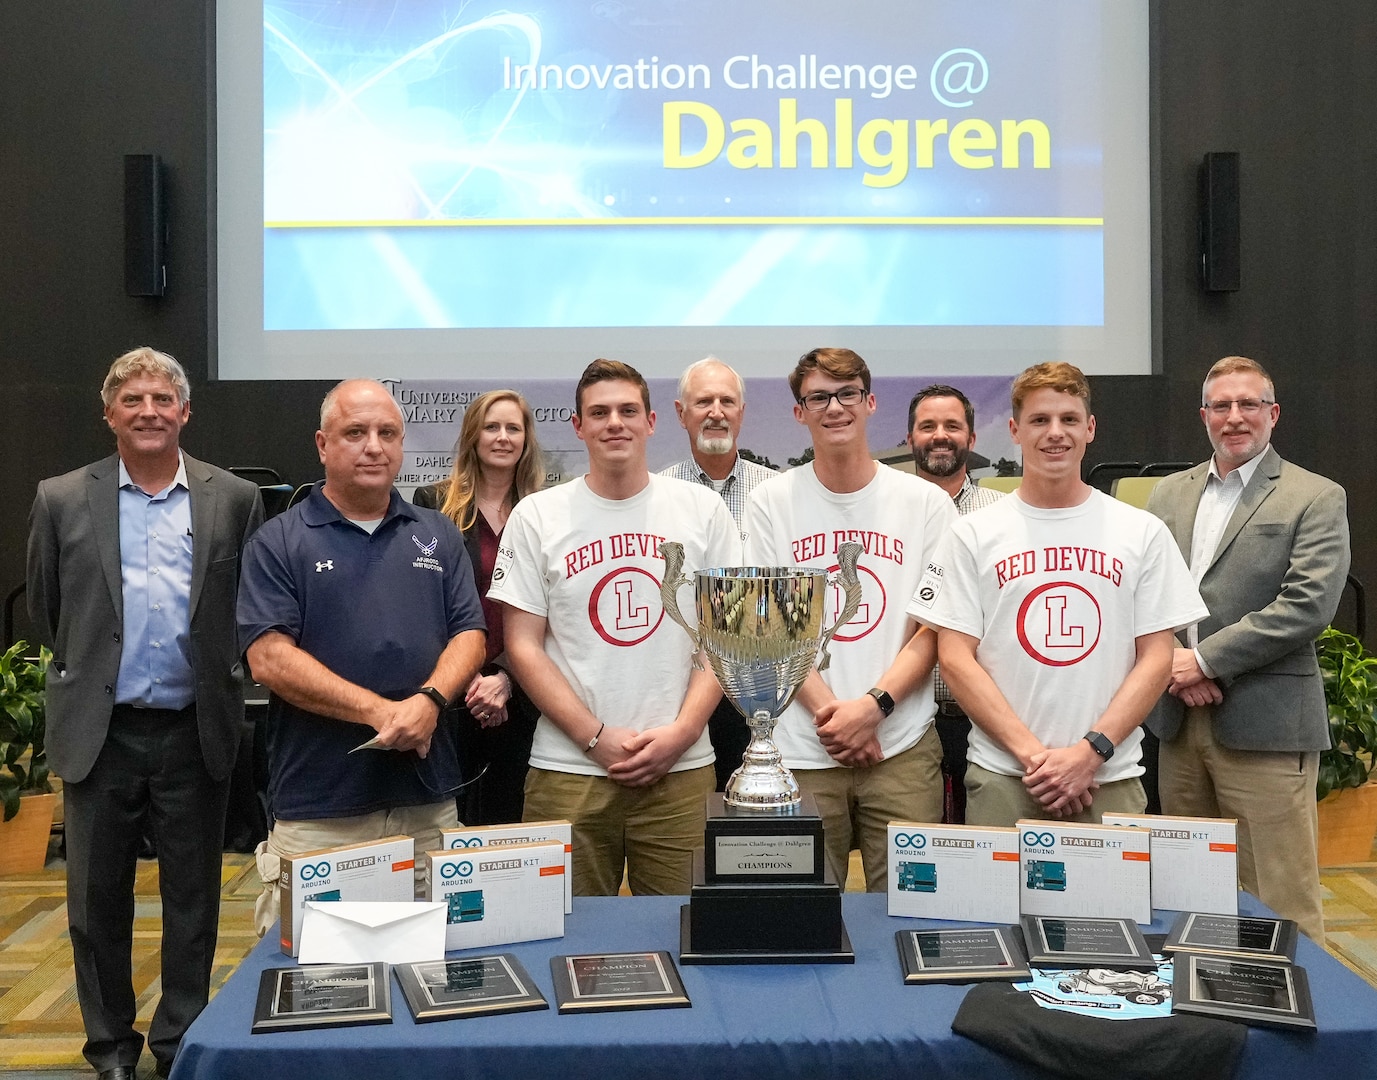 IMAGE: Lancaster County High School’s robotics team placed second at the Innovation Challenge @Dahlgren. The team earned $1,500 for their school’s STEM program.